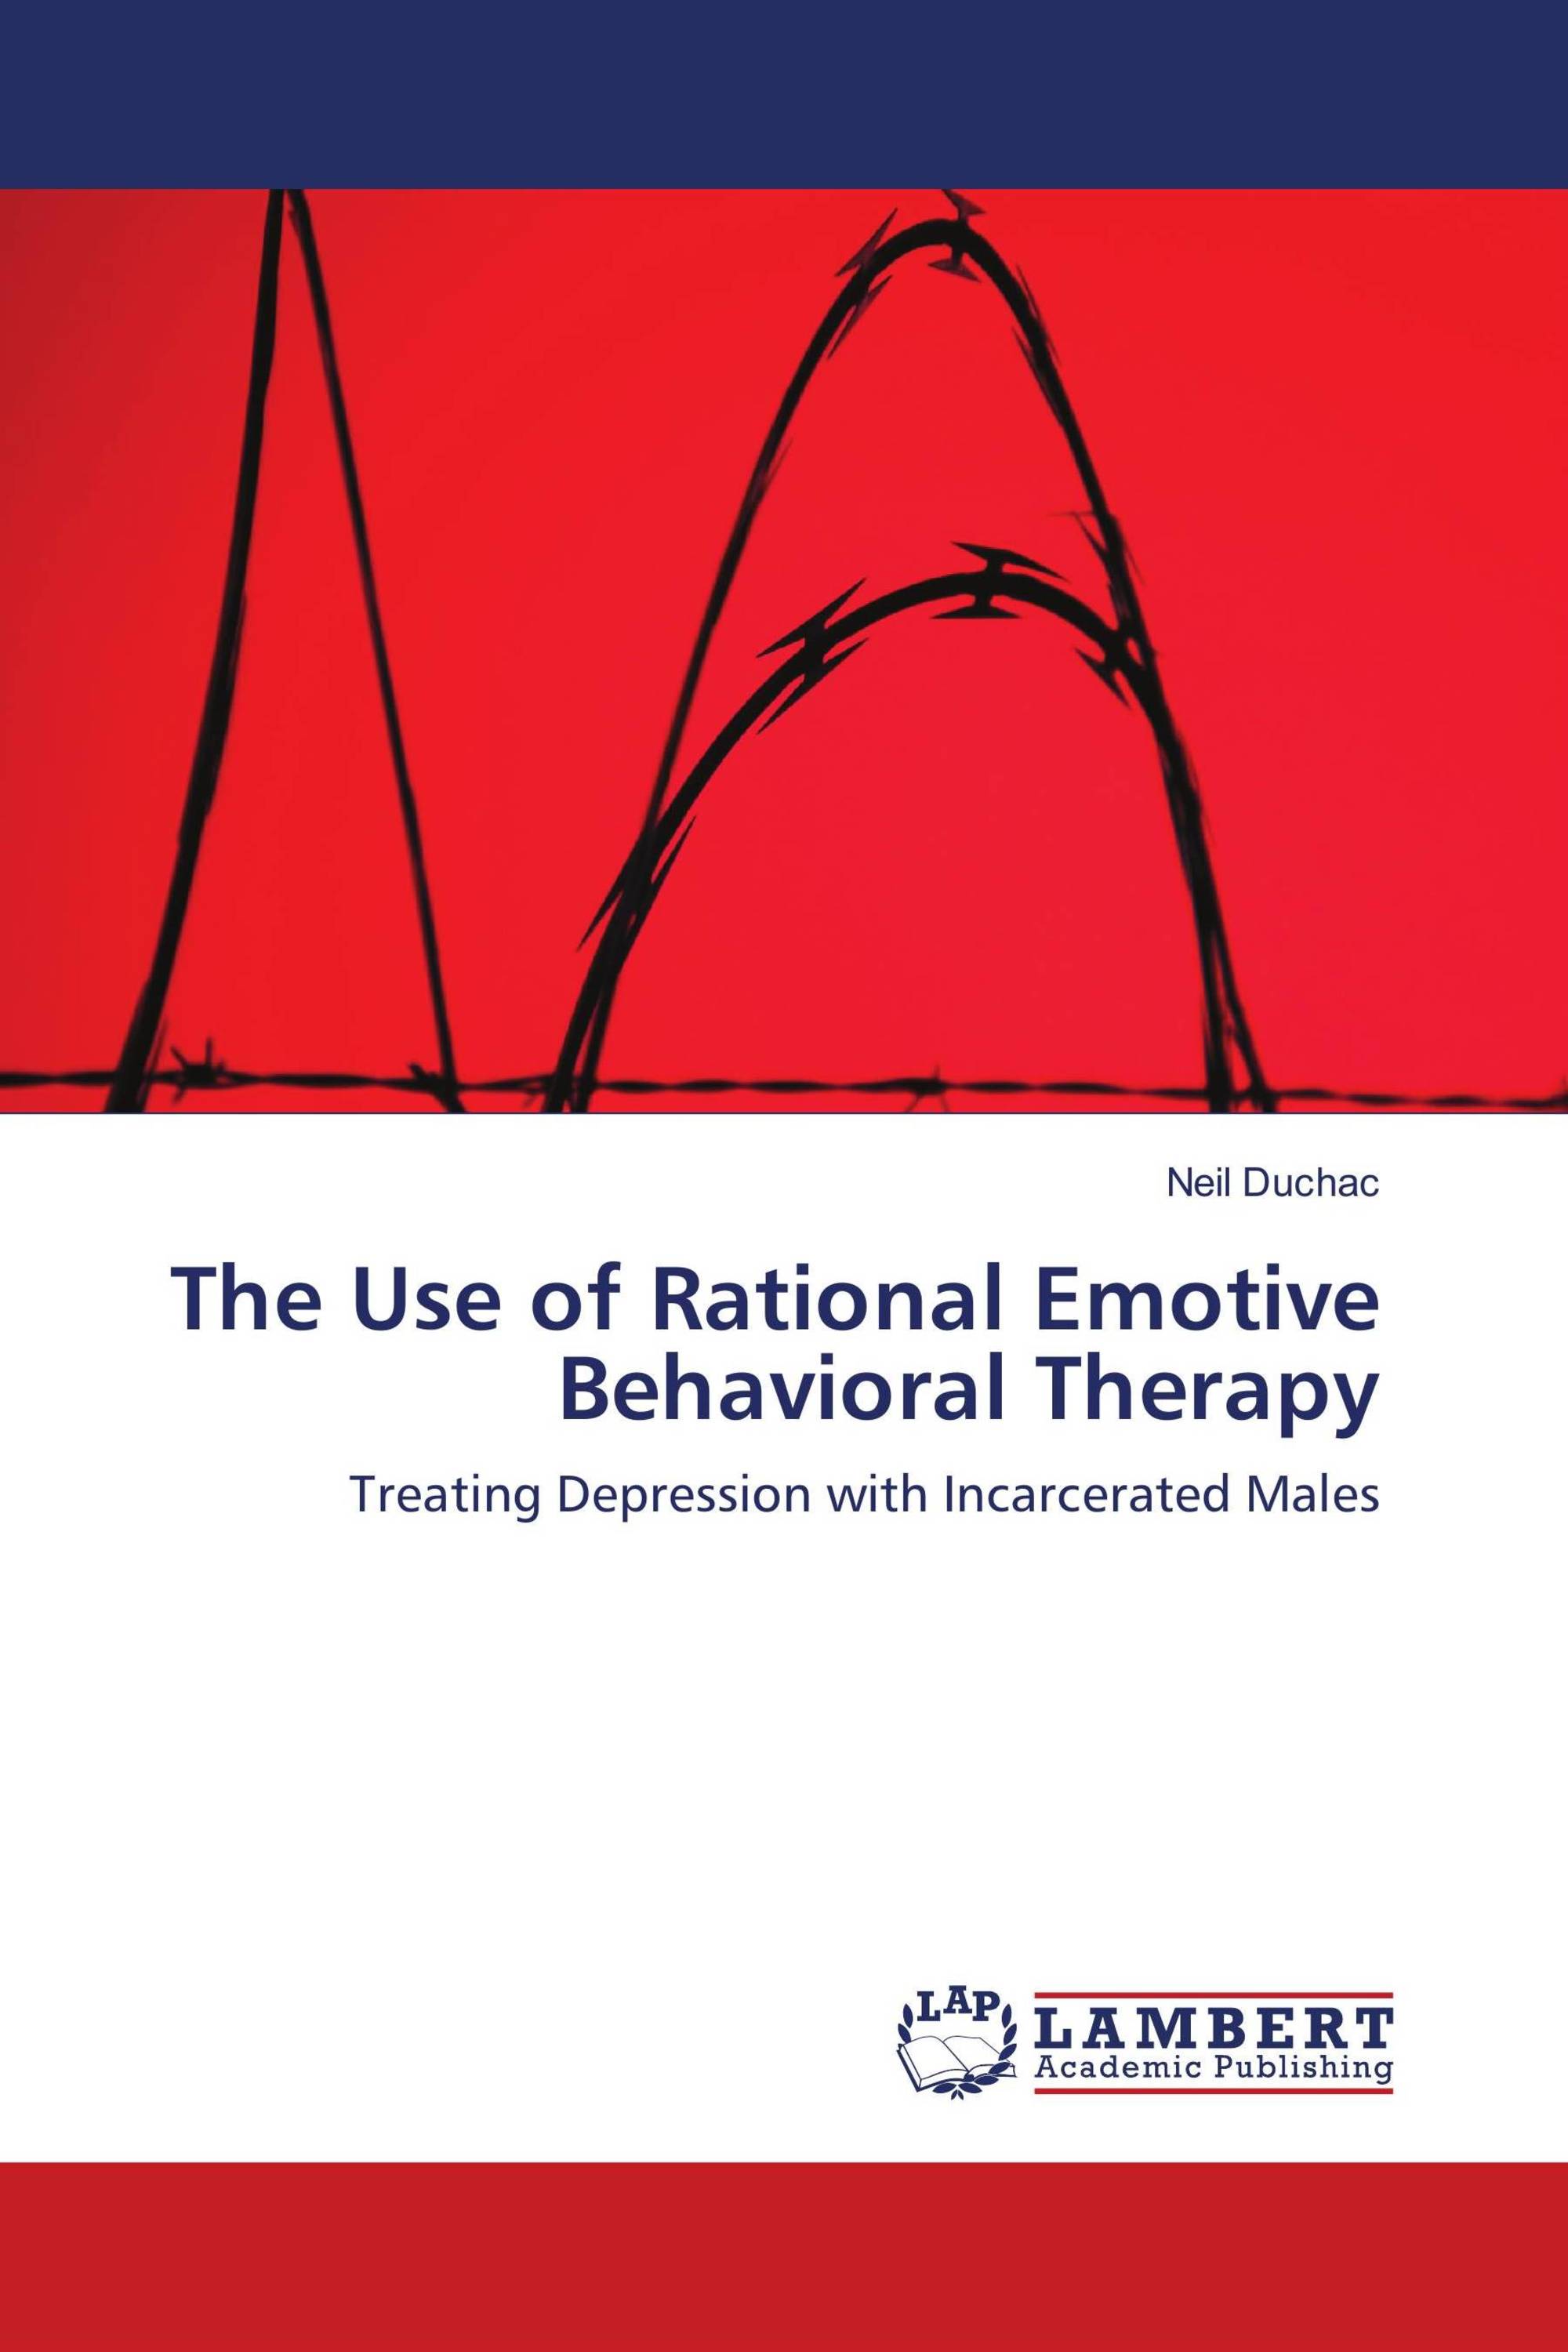 The Use of Rational Emotive Behavioral Therapy